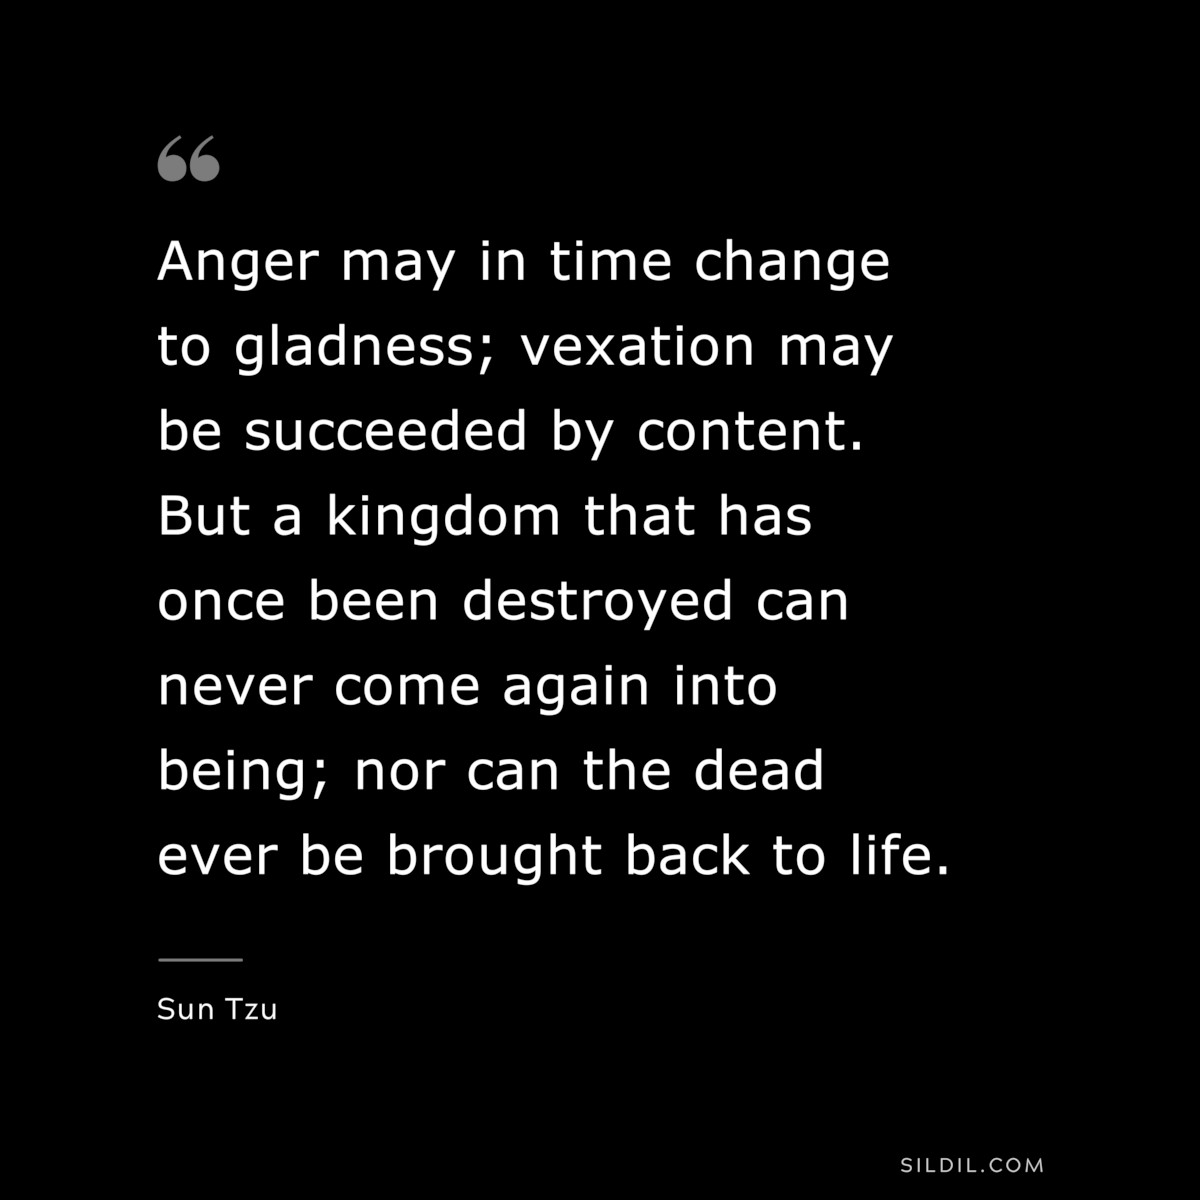 Anger may in time change to gladness; vexation may be succeeded by content. But a kingdom that has once been destroyed can never come again into being; nor can the dead ever be brought back to life.― Sun Tzu